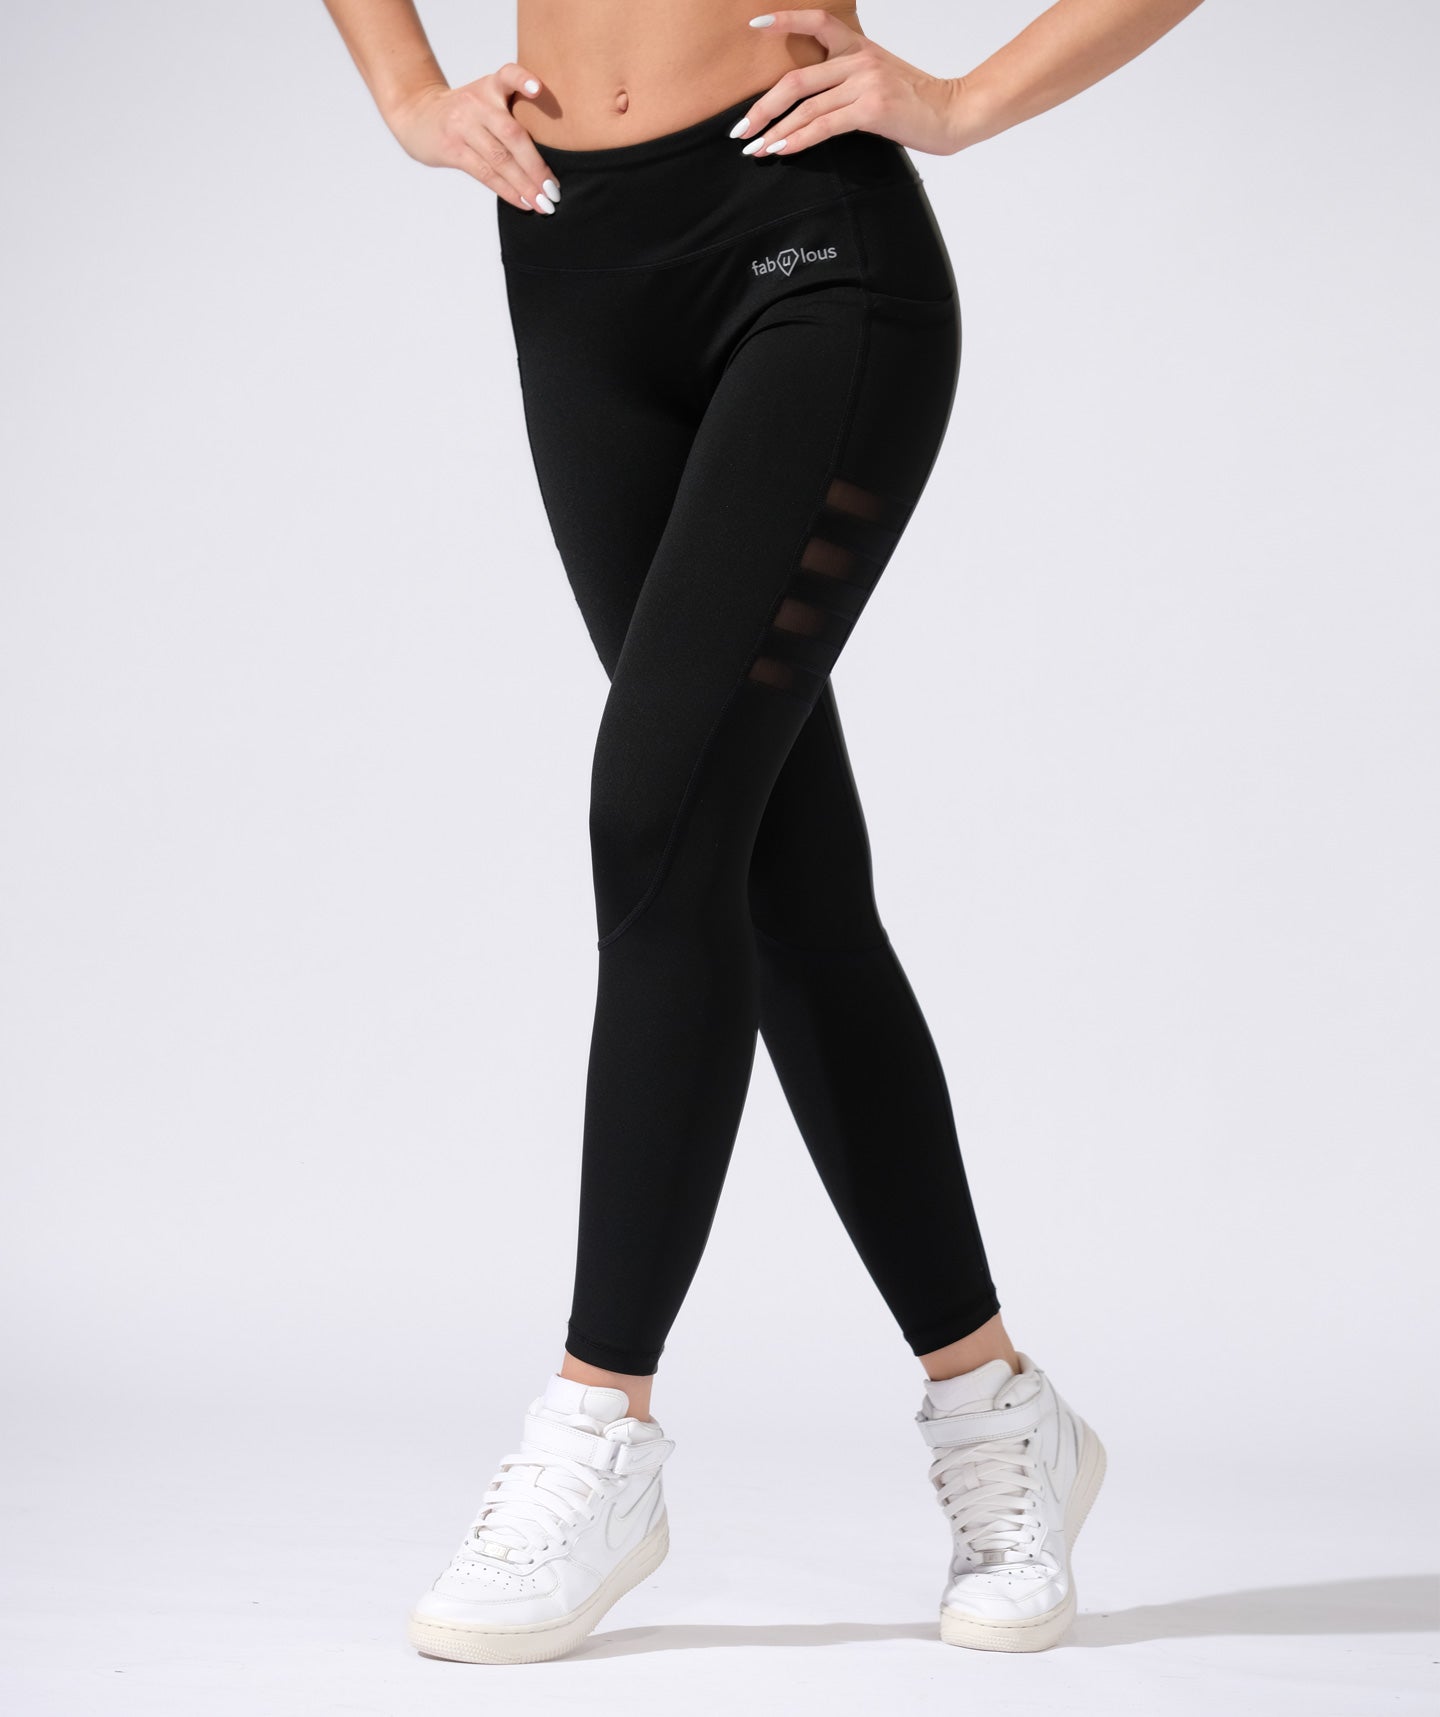 TechFit Leggings with Transparent Mesh and Side Pockets in Black